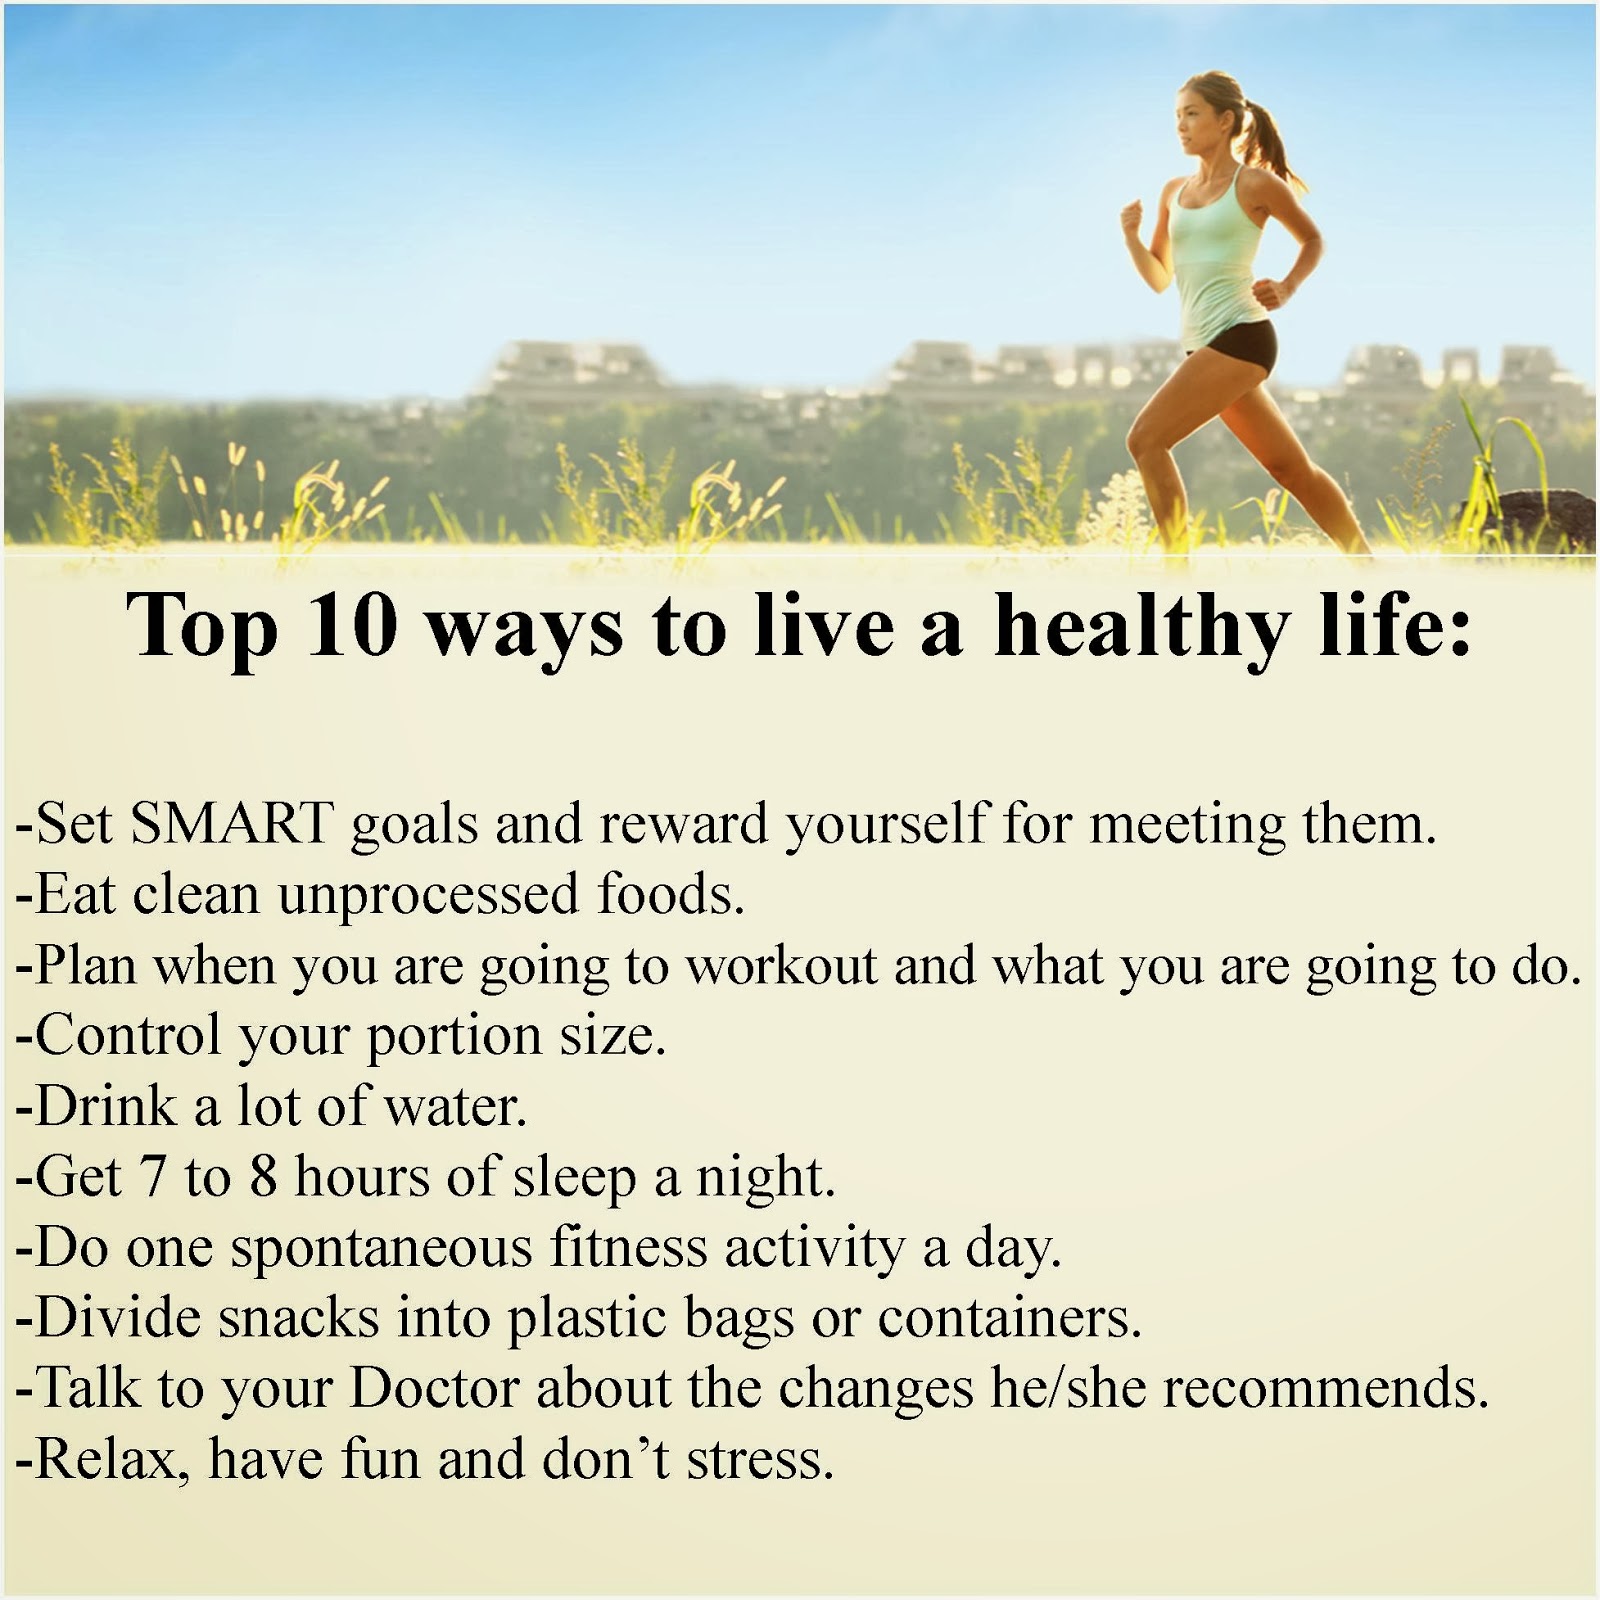 Muffins Vs Muffintop Top 10 Ways To Live A Healthy Life